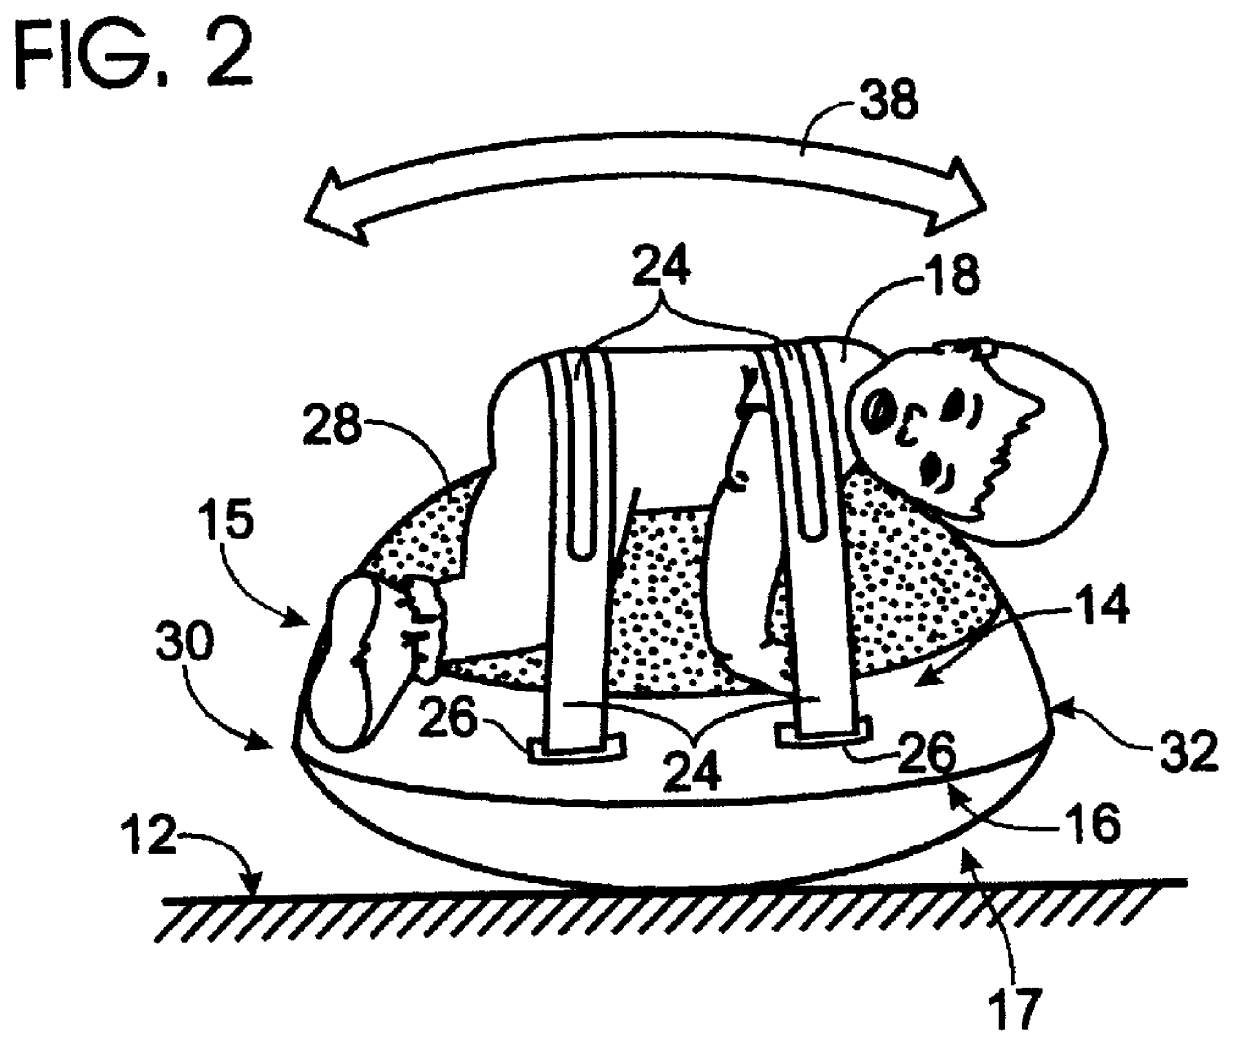 Support device for baby with abdominal pain and method for using it